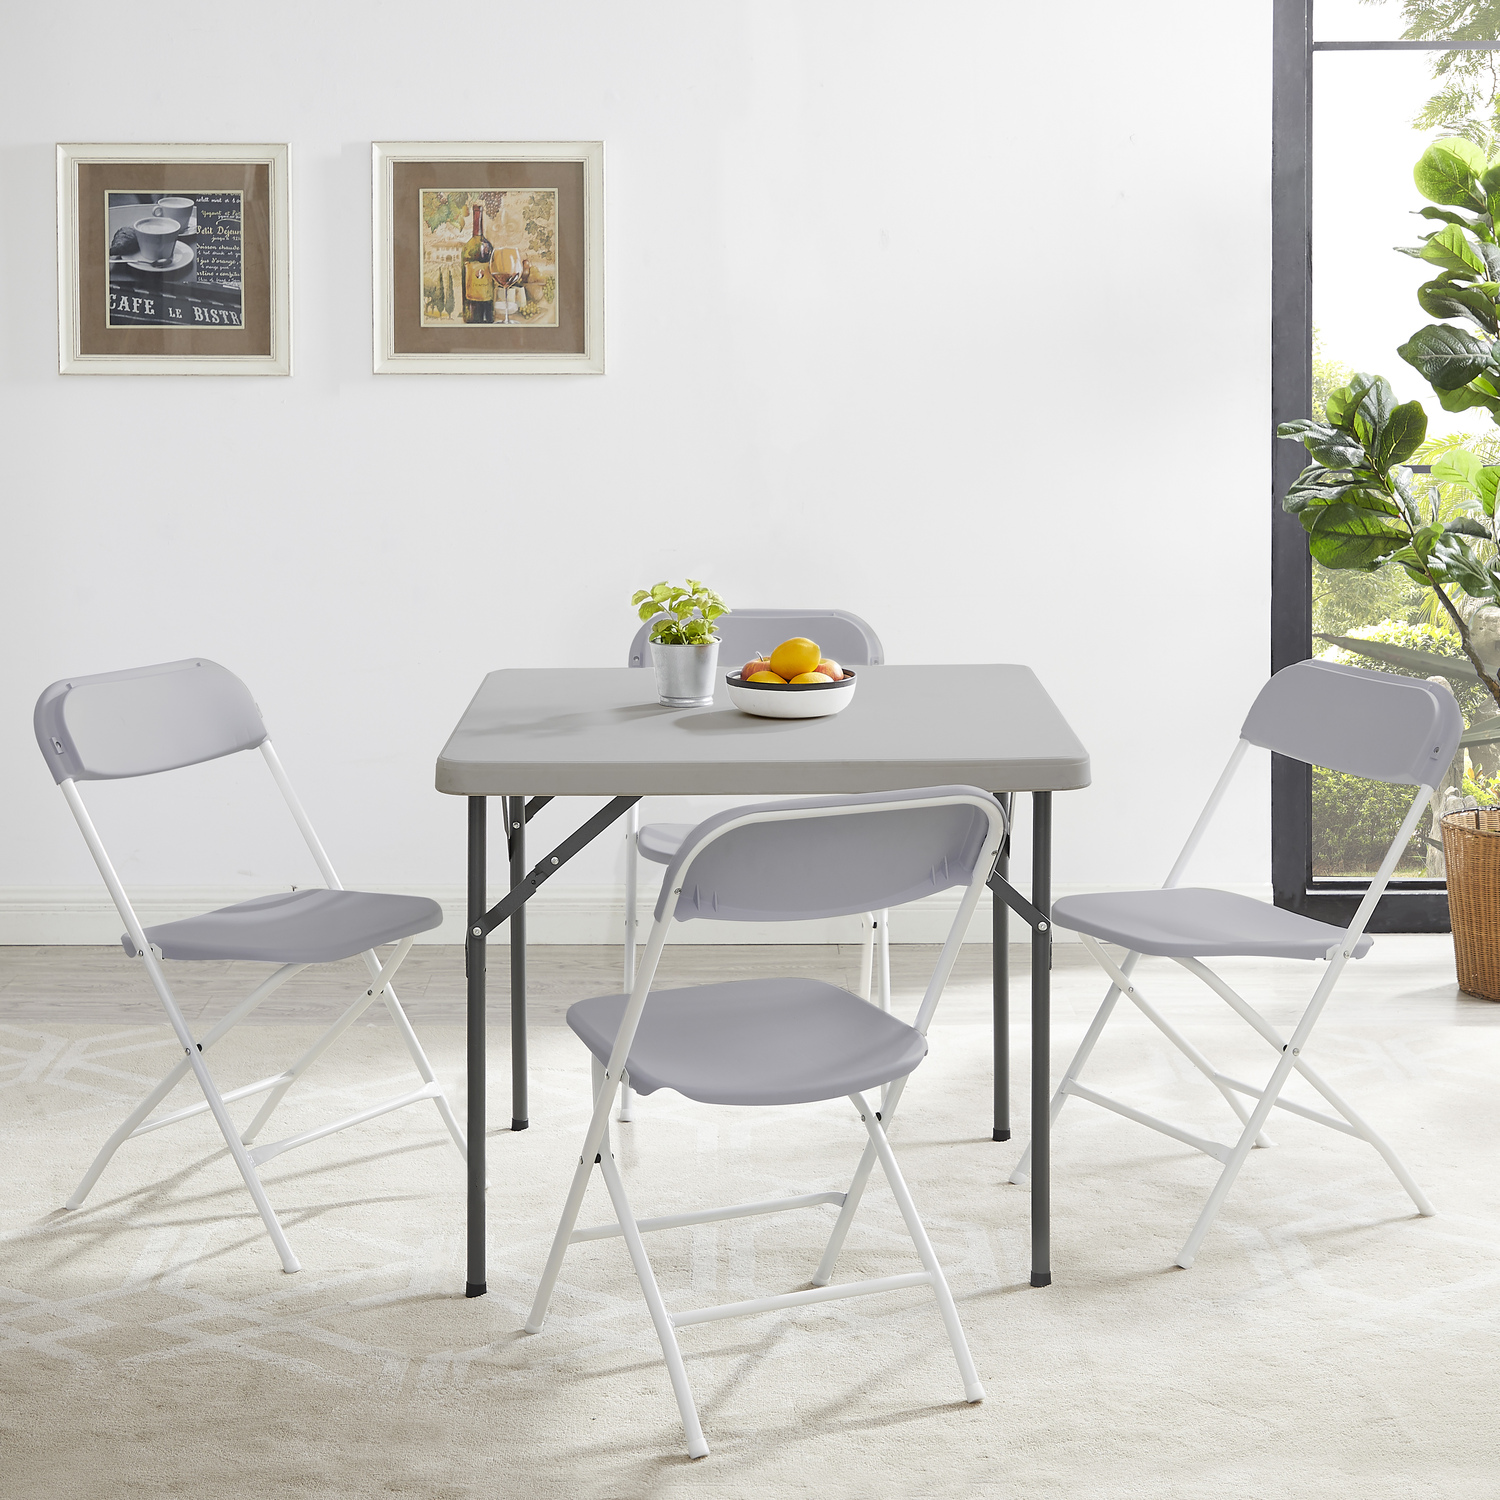 Naomi Home 5 Piece Resin Square Folding Card Table and Chair Set